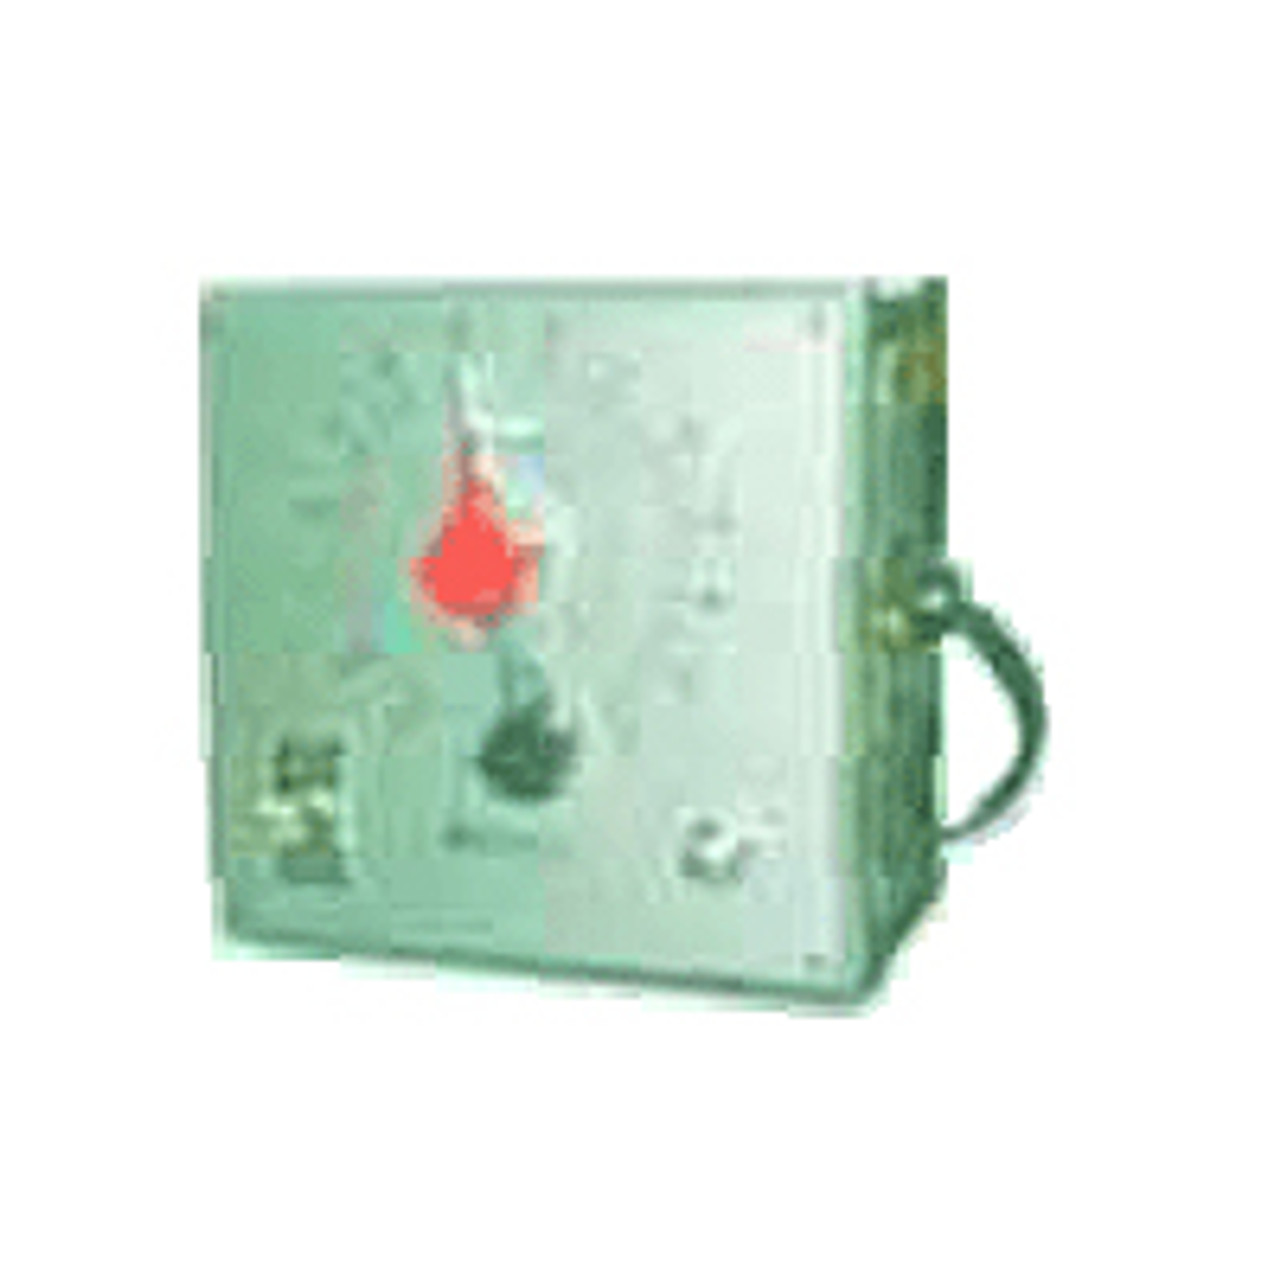 Industrial Timer P-15M-120/60 Interval Timers